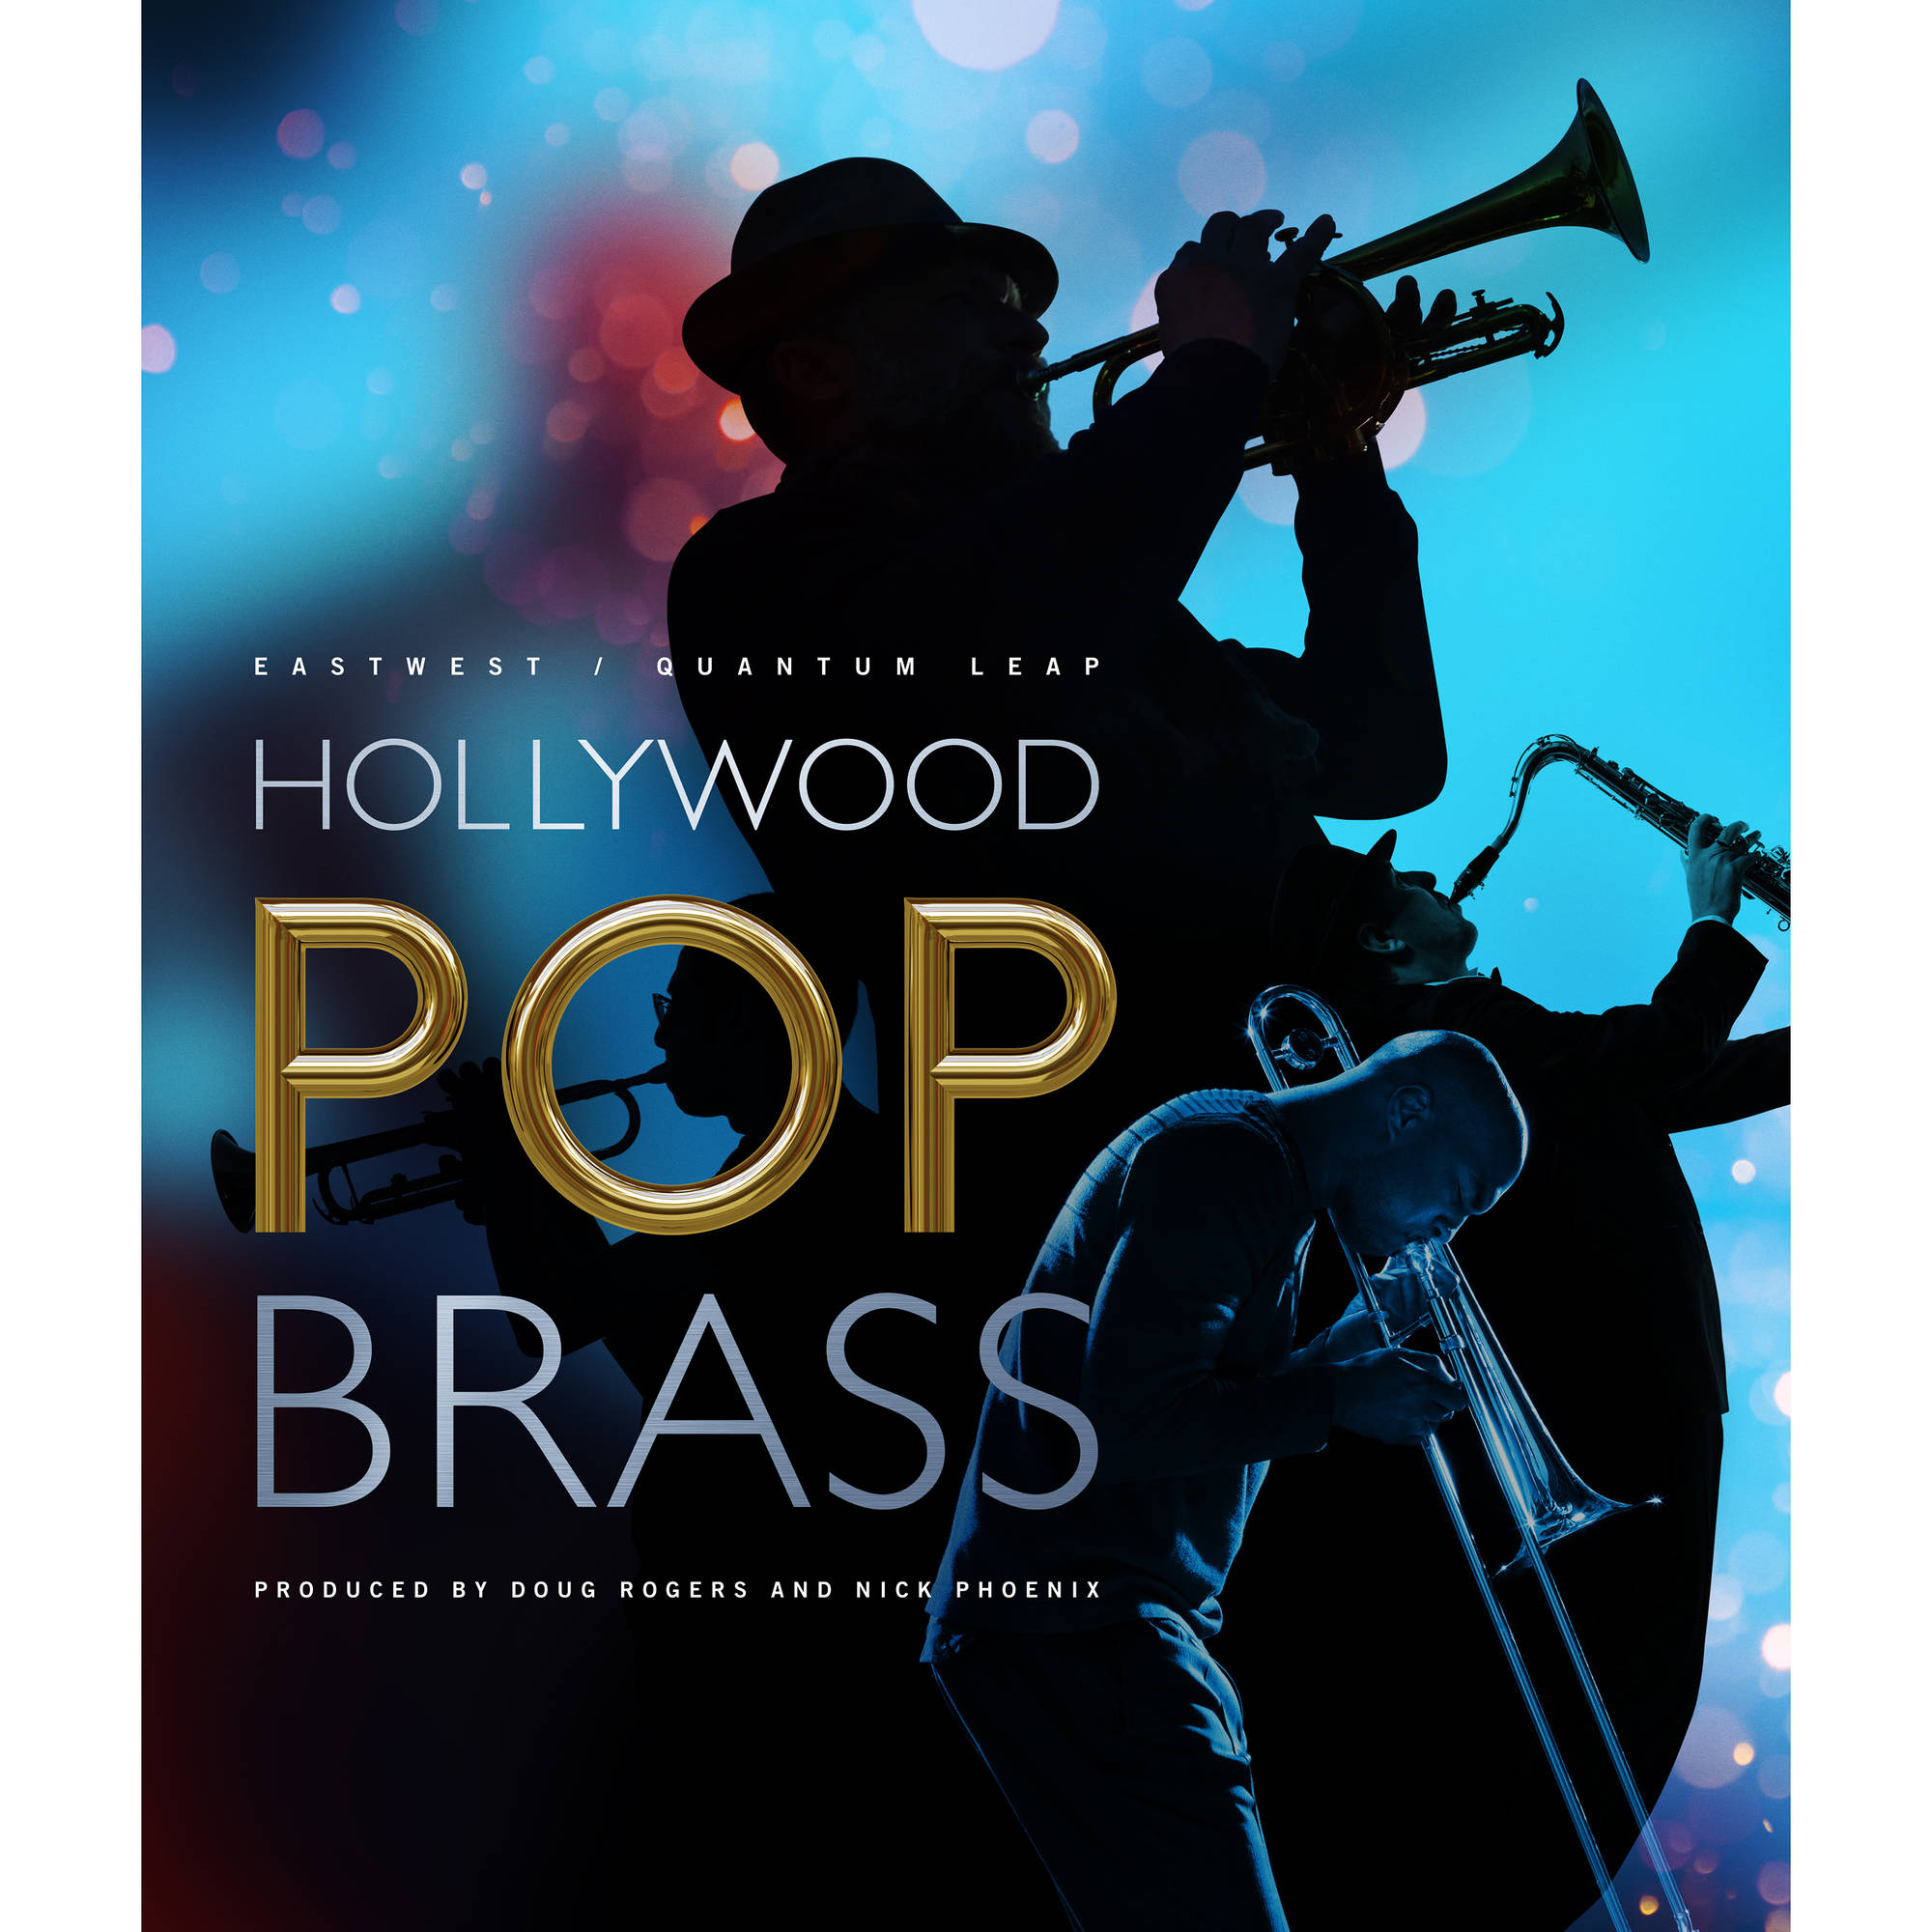 Hollywood brass free download mp3